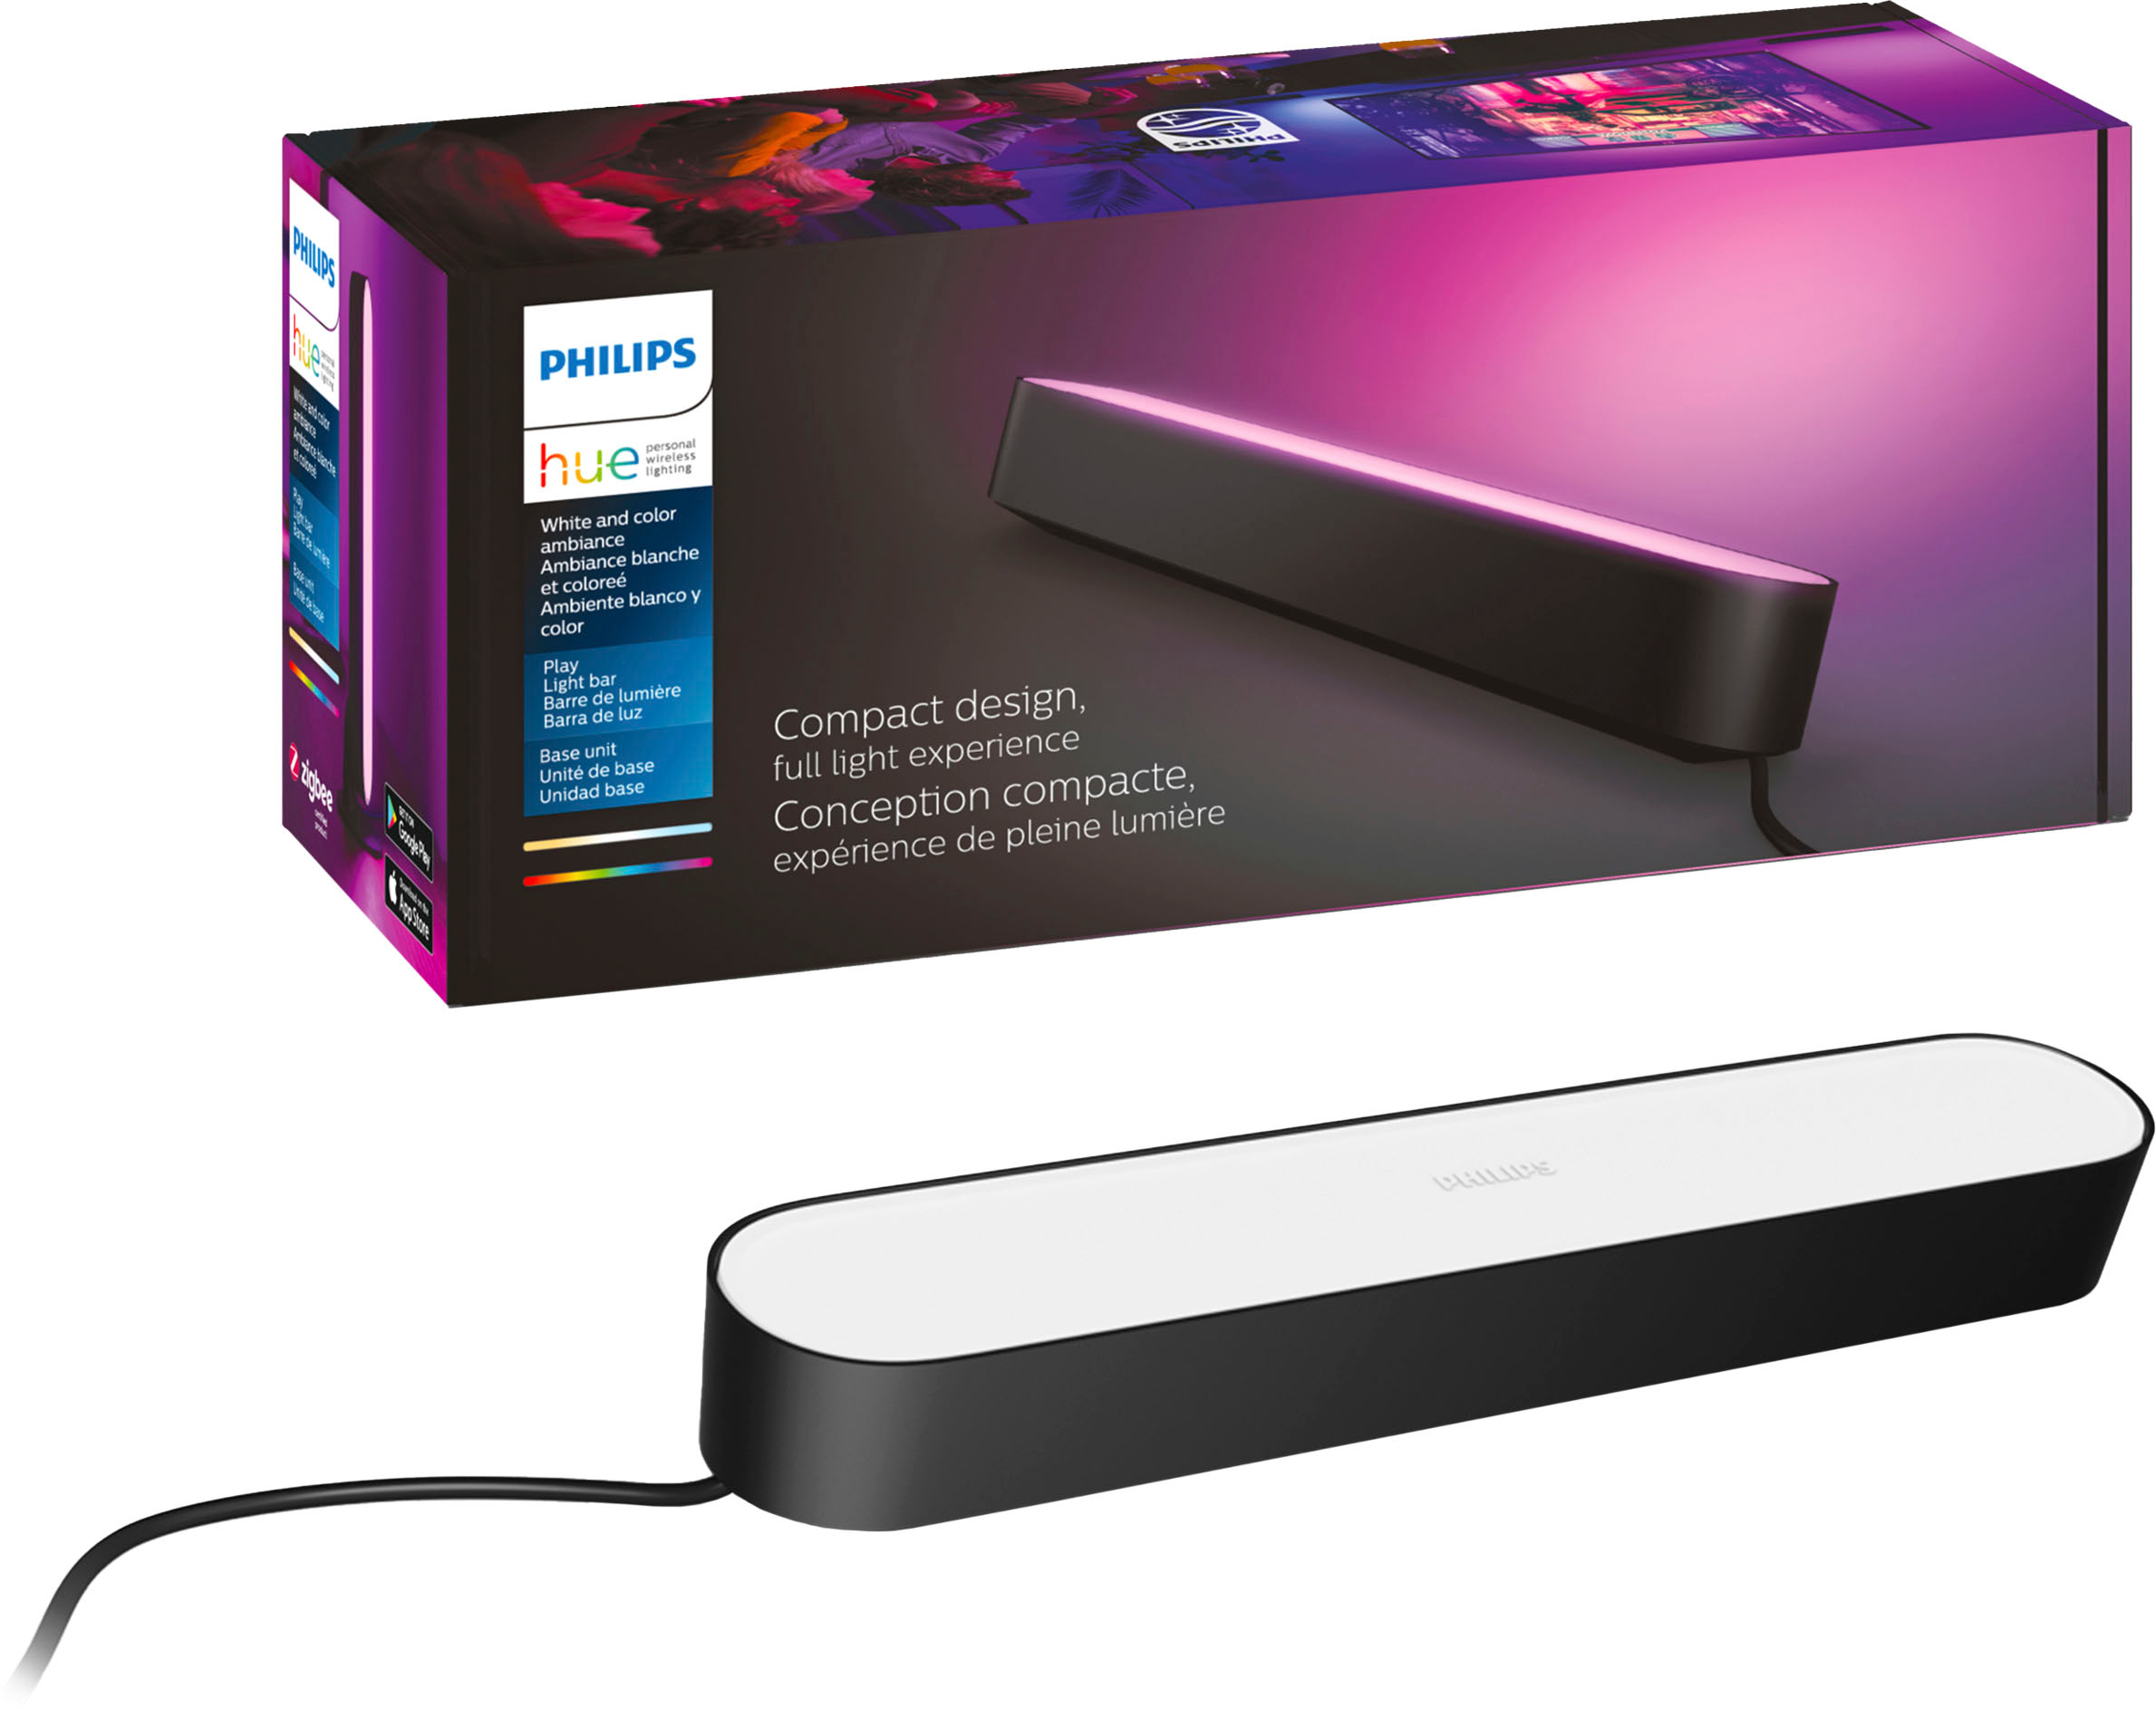 Philips Hue Play 7820330U7 White and Color Ambiance LED Bar Light for sale online 